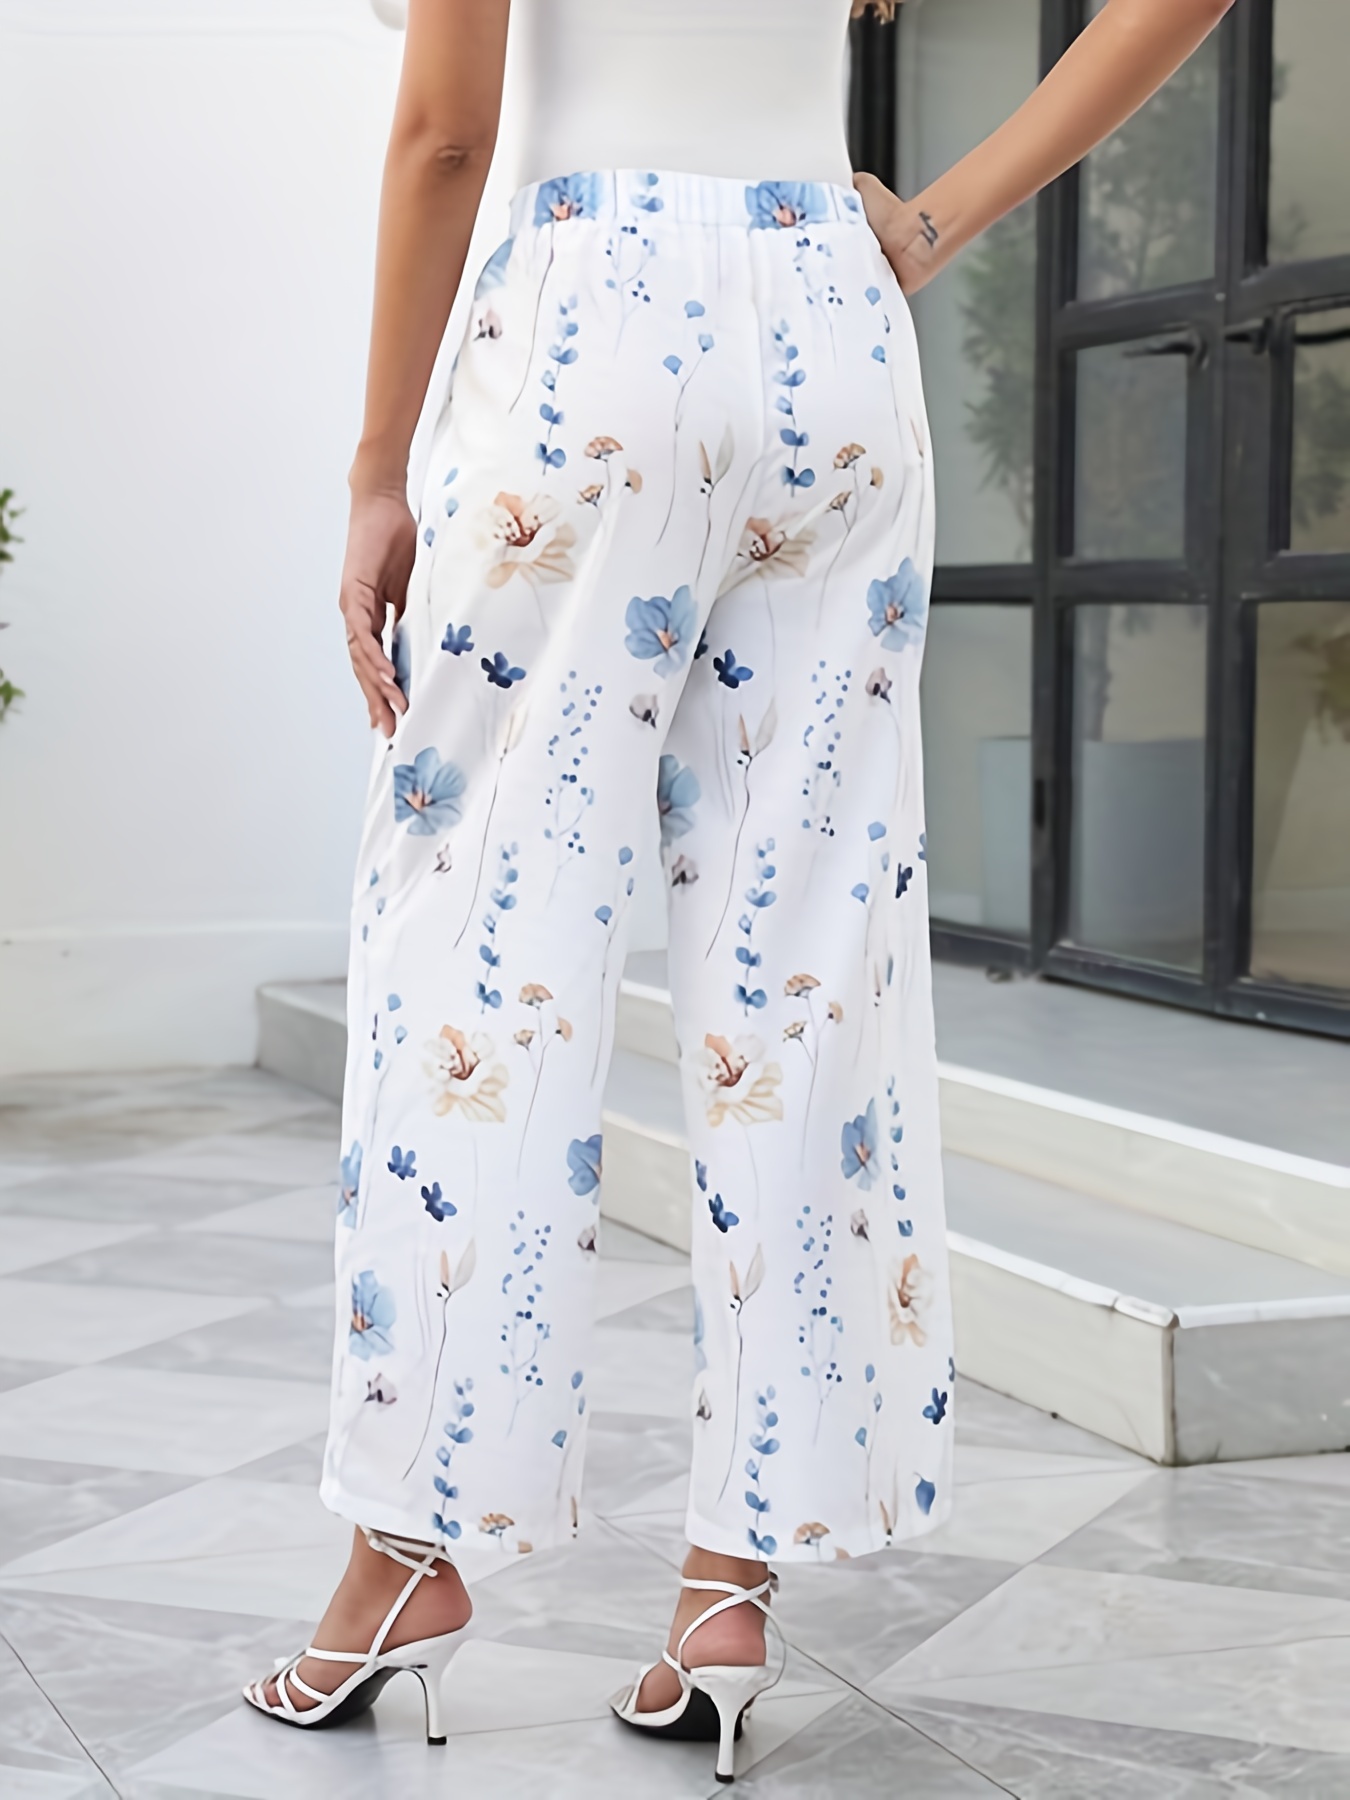 Casual Floral Print Pants for Women Elastic Waist Loose Spring